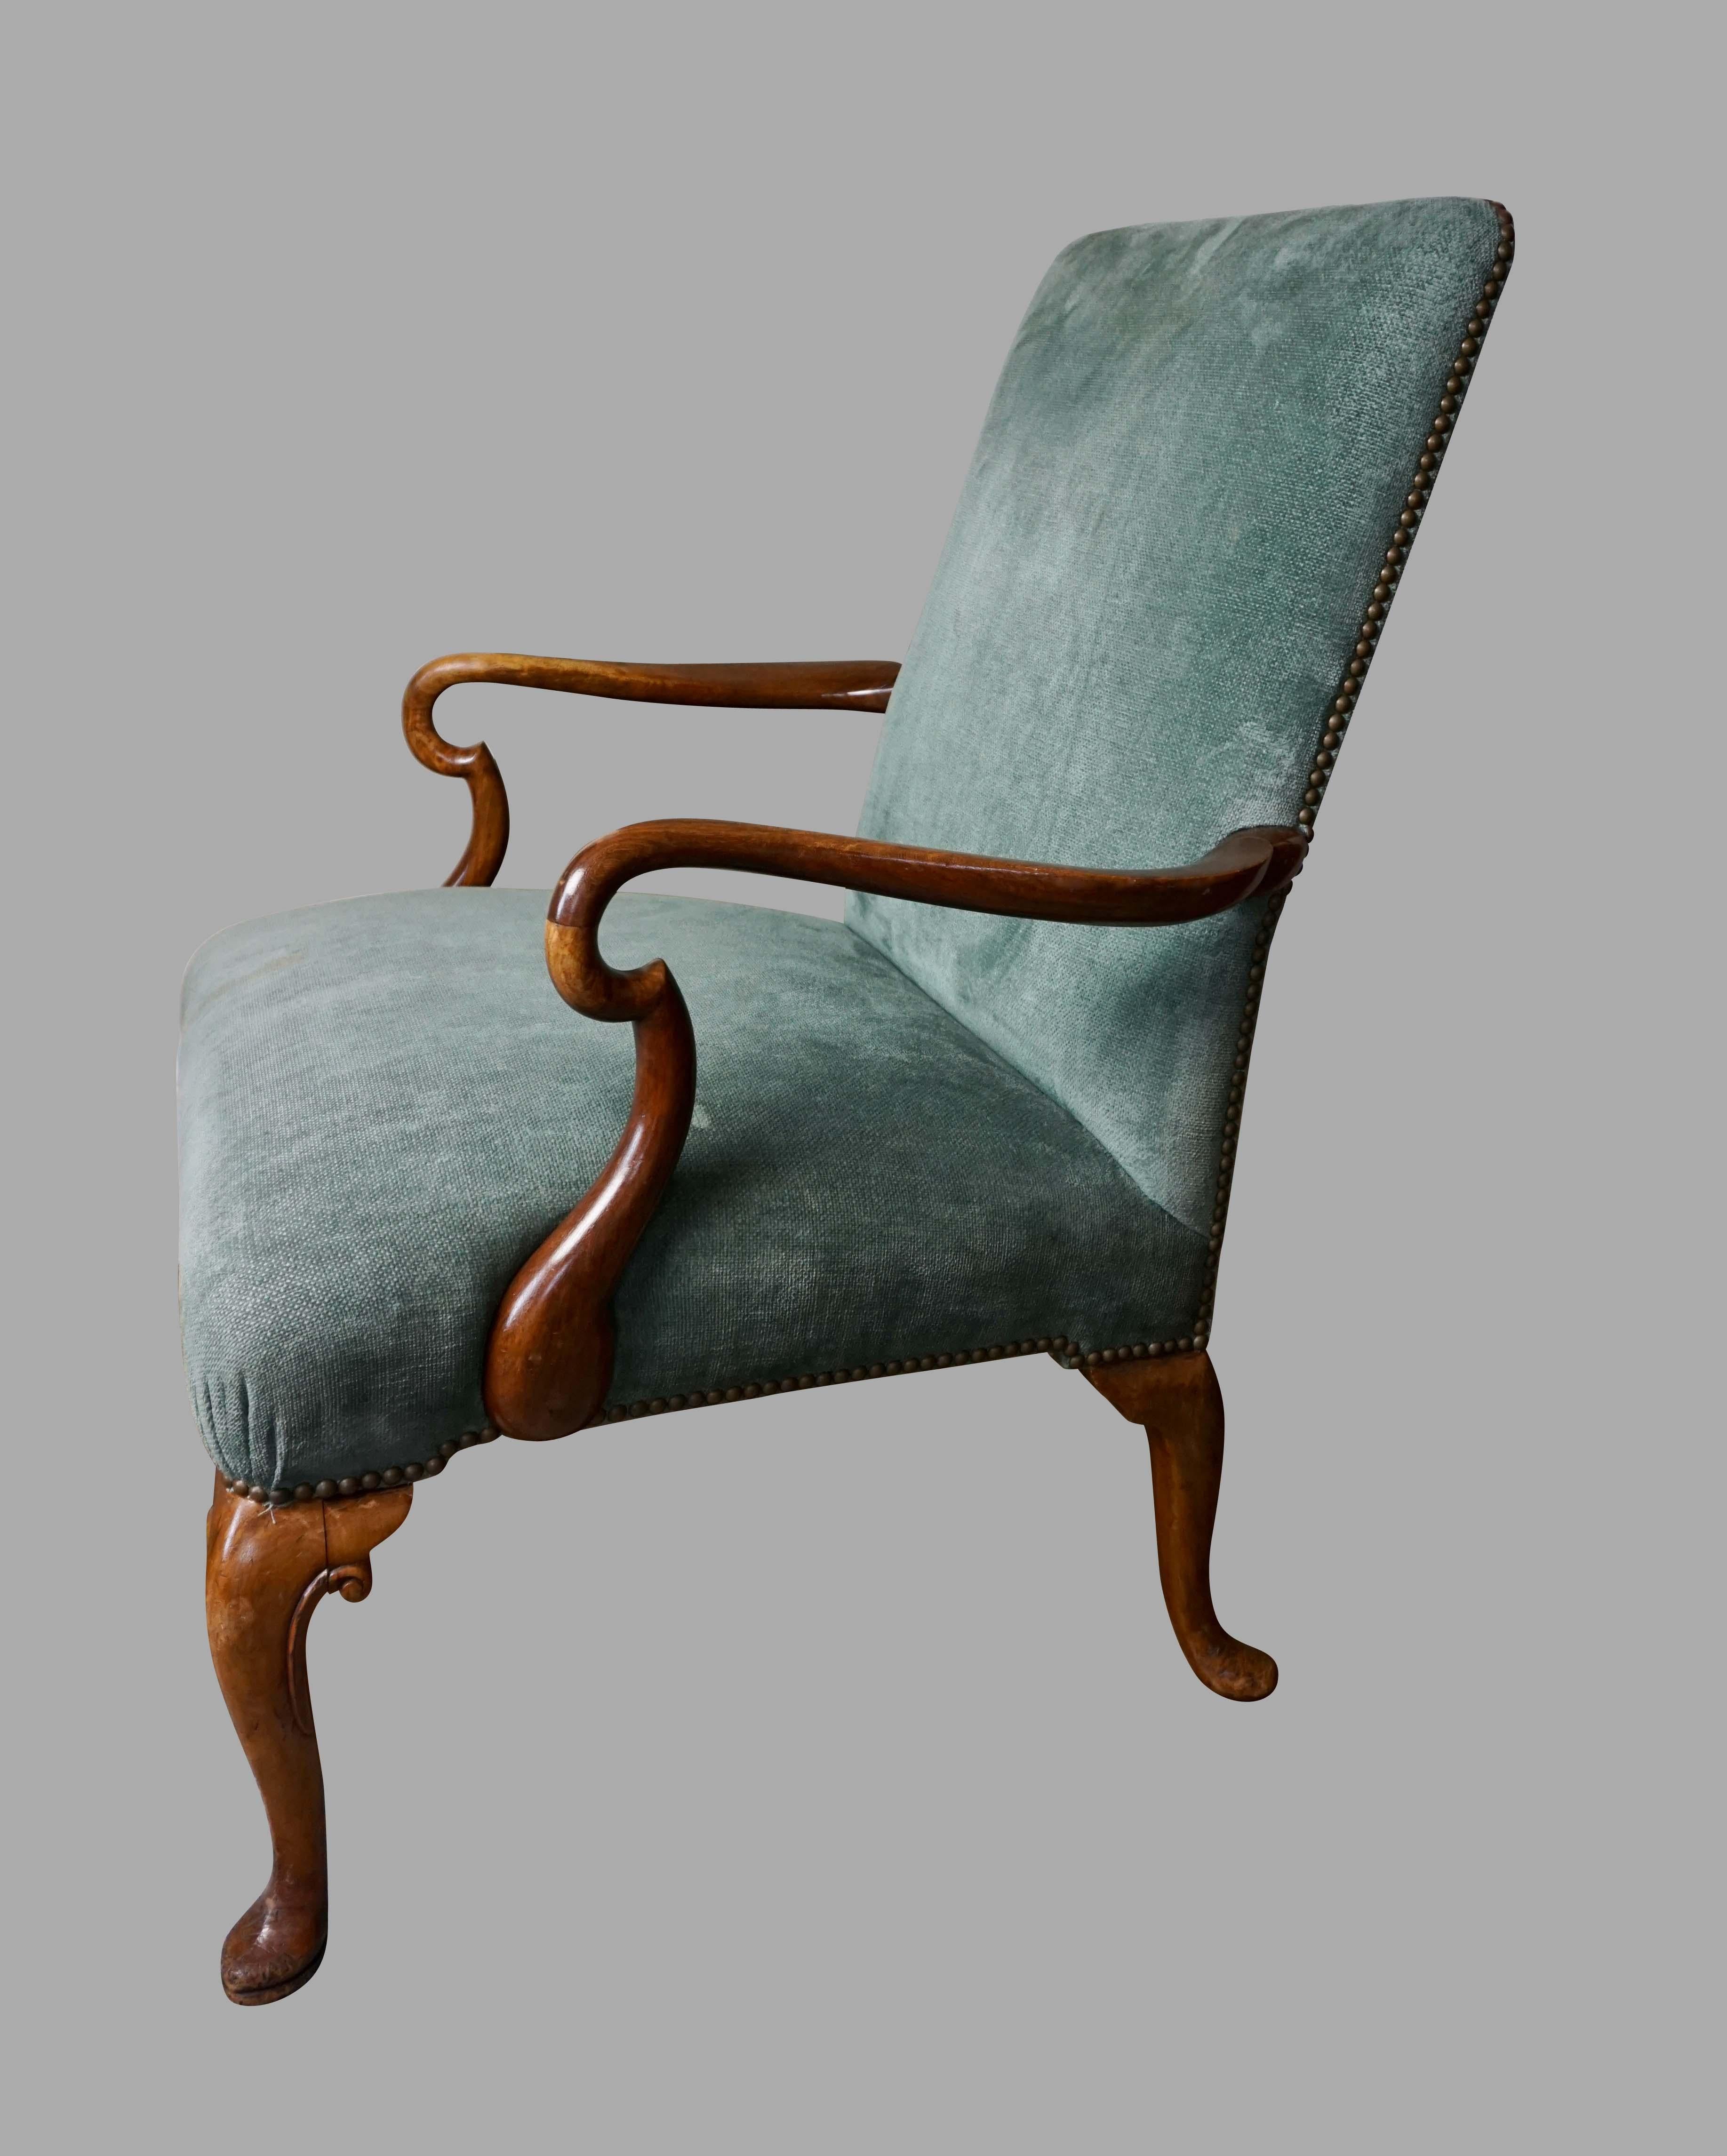 A handsome and substantial English Georgian style open armchair with shepherd's crook arms supported on scrolled cabriole legs ending in slipper feet. Now upholstered in blue-grey fabric finished with nailhead trim. A comfortable and elegant